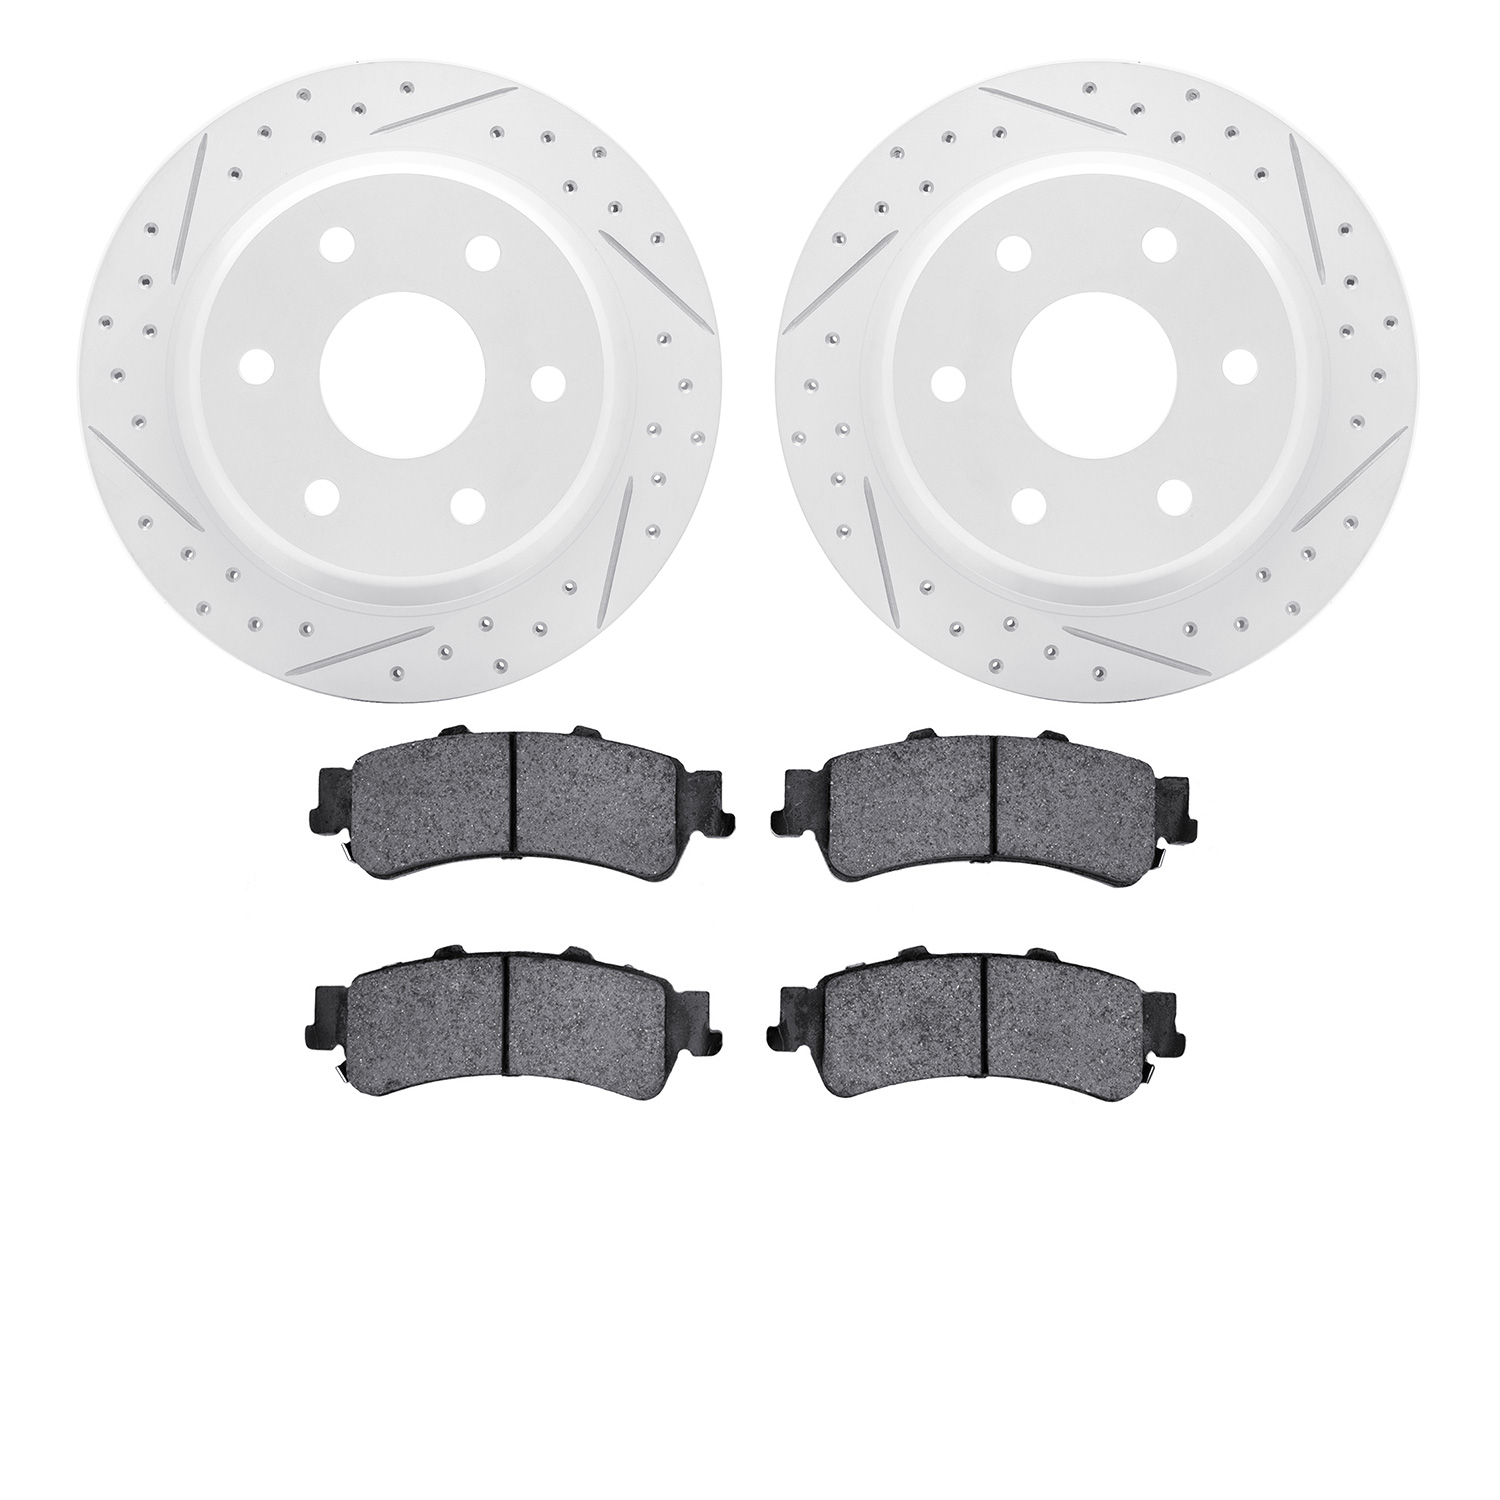 2402-48013 Geoperformance Drilled/Slotted Brake Rotors with Ultimate-Duty Brake Pads Kit, 1999-2007 GM, Position: Rear